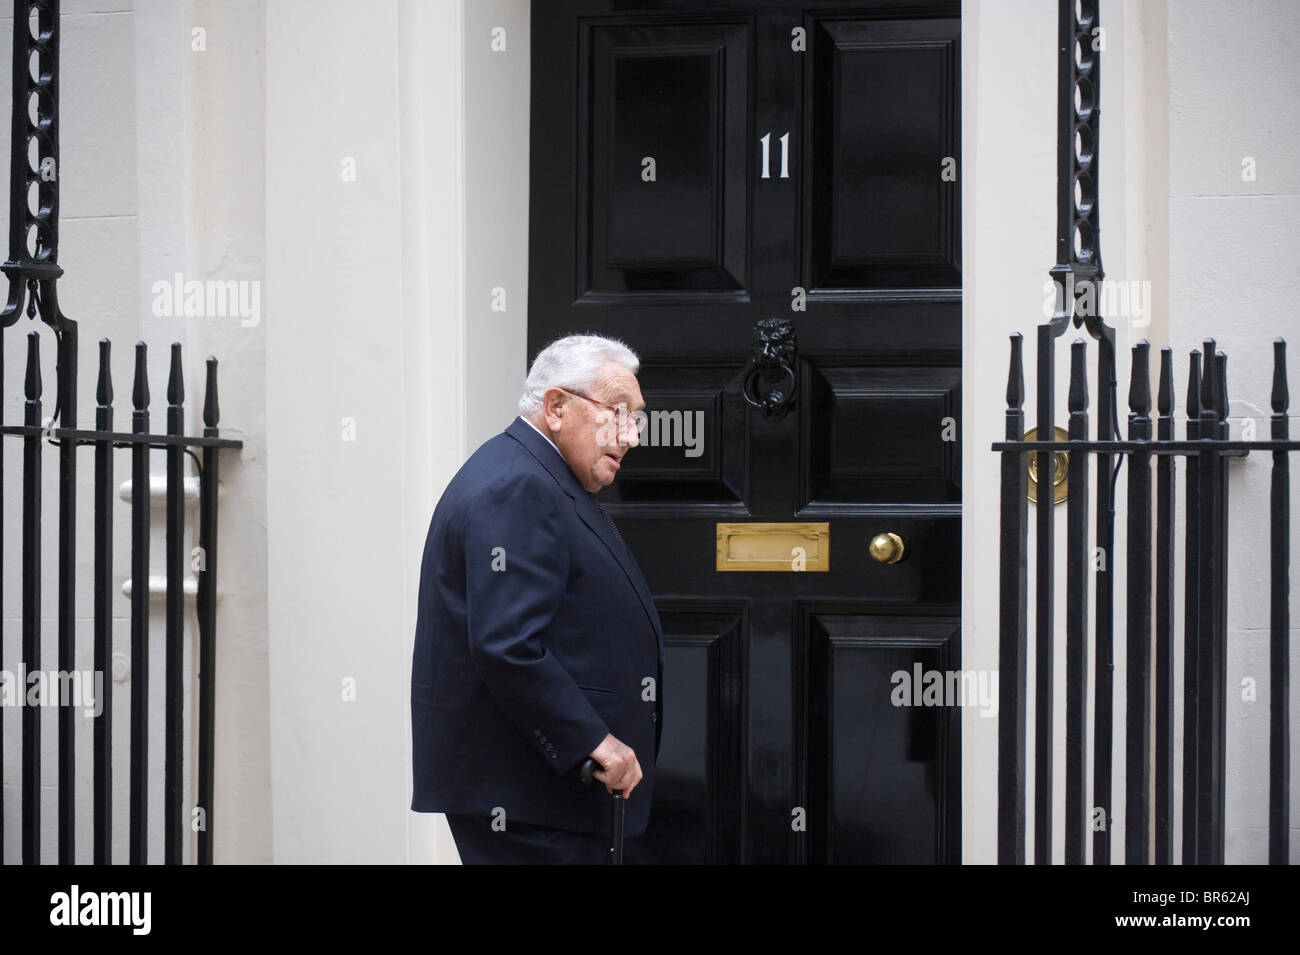 Henry Kissinger arrives 11 downing Street residence of Chancellor of the Exchequer for a meeting Stock Photo